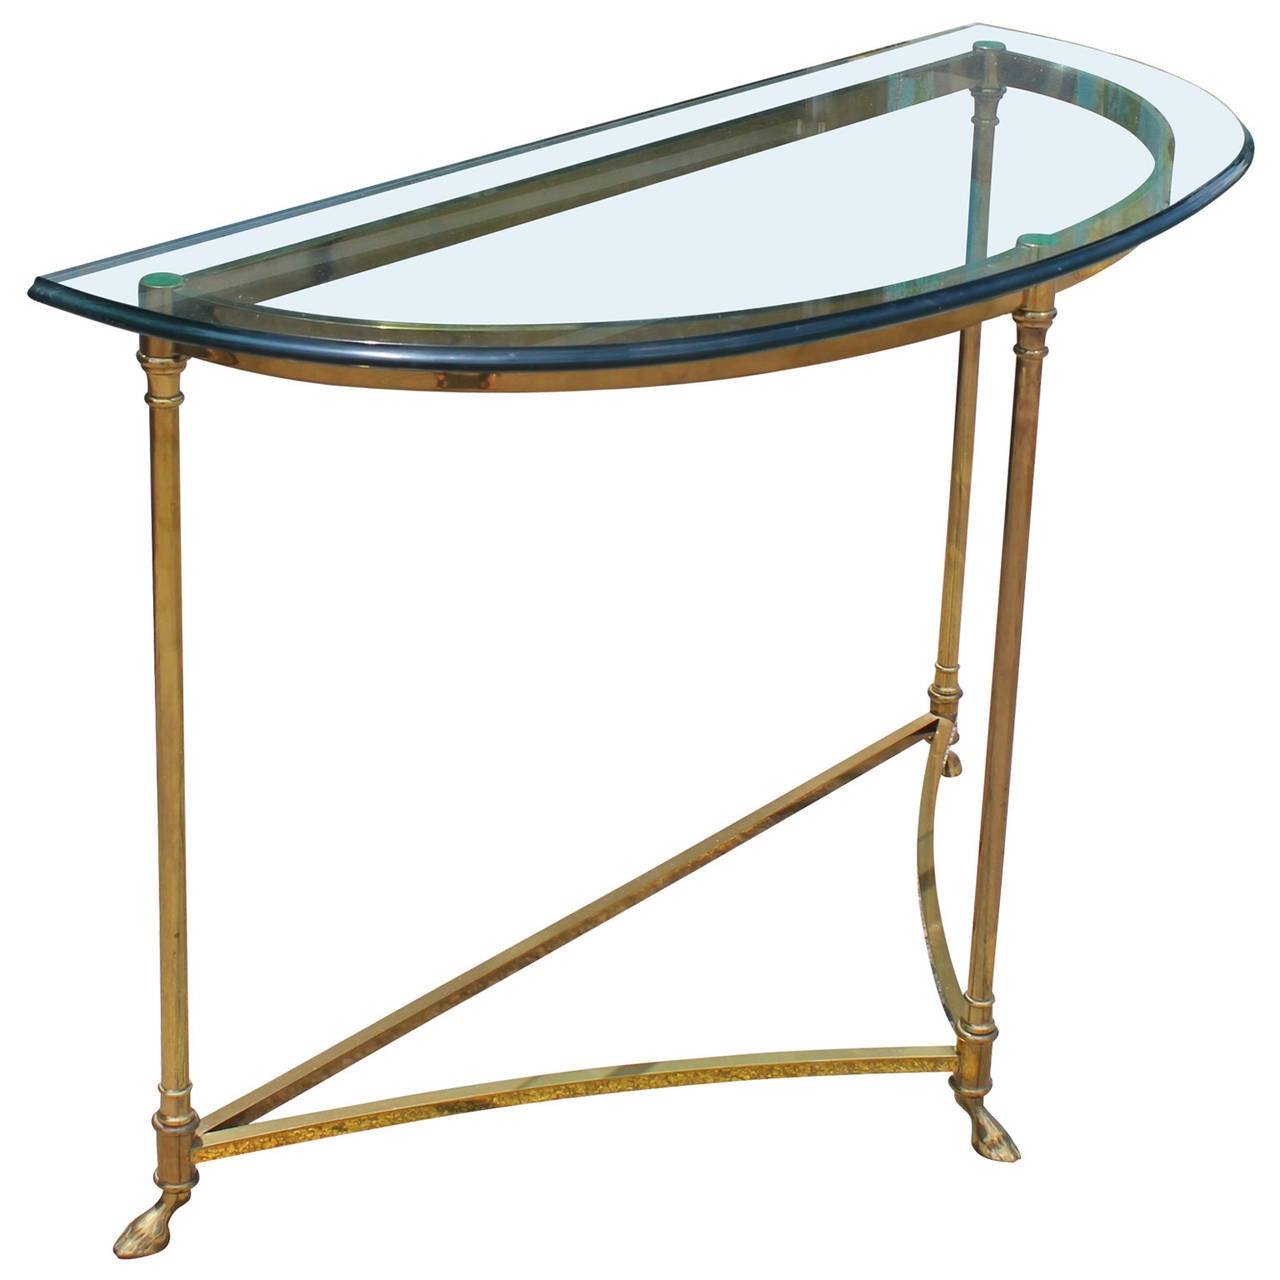 Great Hollywood Regency style La Barge brass and glass demi-lune console table. Table has long delicate legs capped with wonderfully curved hooves.